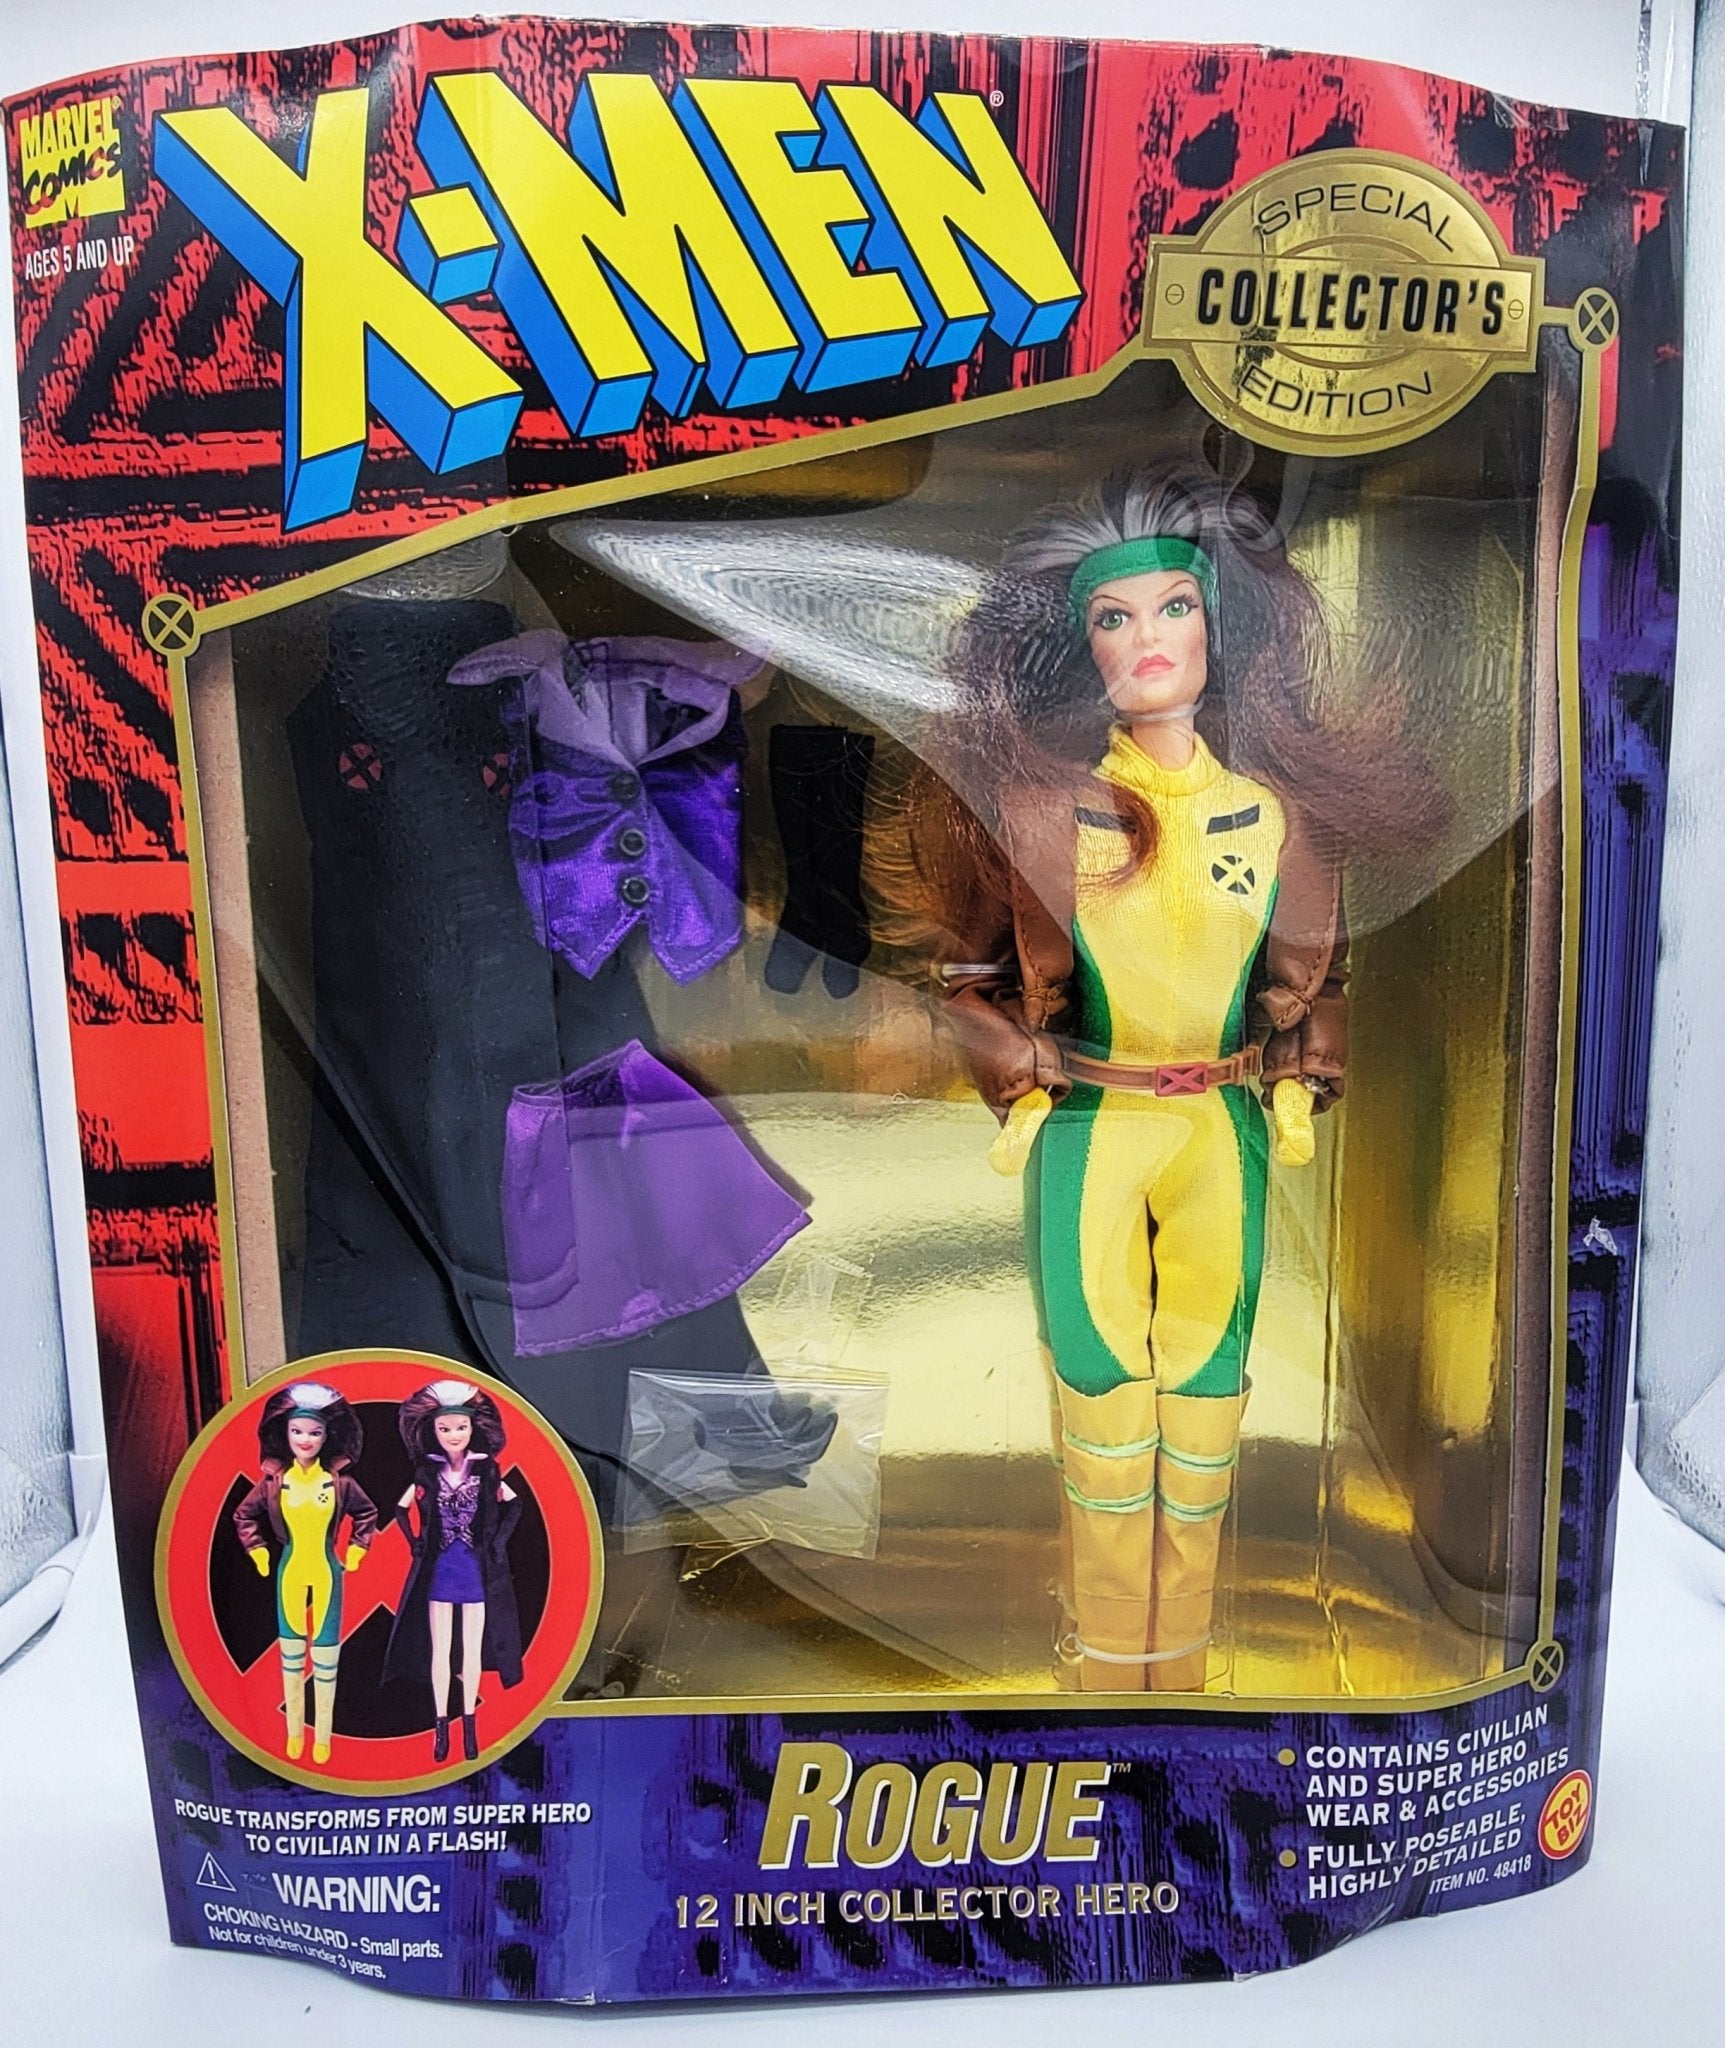 Toy Biz - Toy Biz | Special Collector's Edition - Rogue 12" 1996| Vintage Marvel Action Figure - Action Figures - Steady Bunny Shop